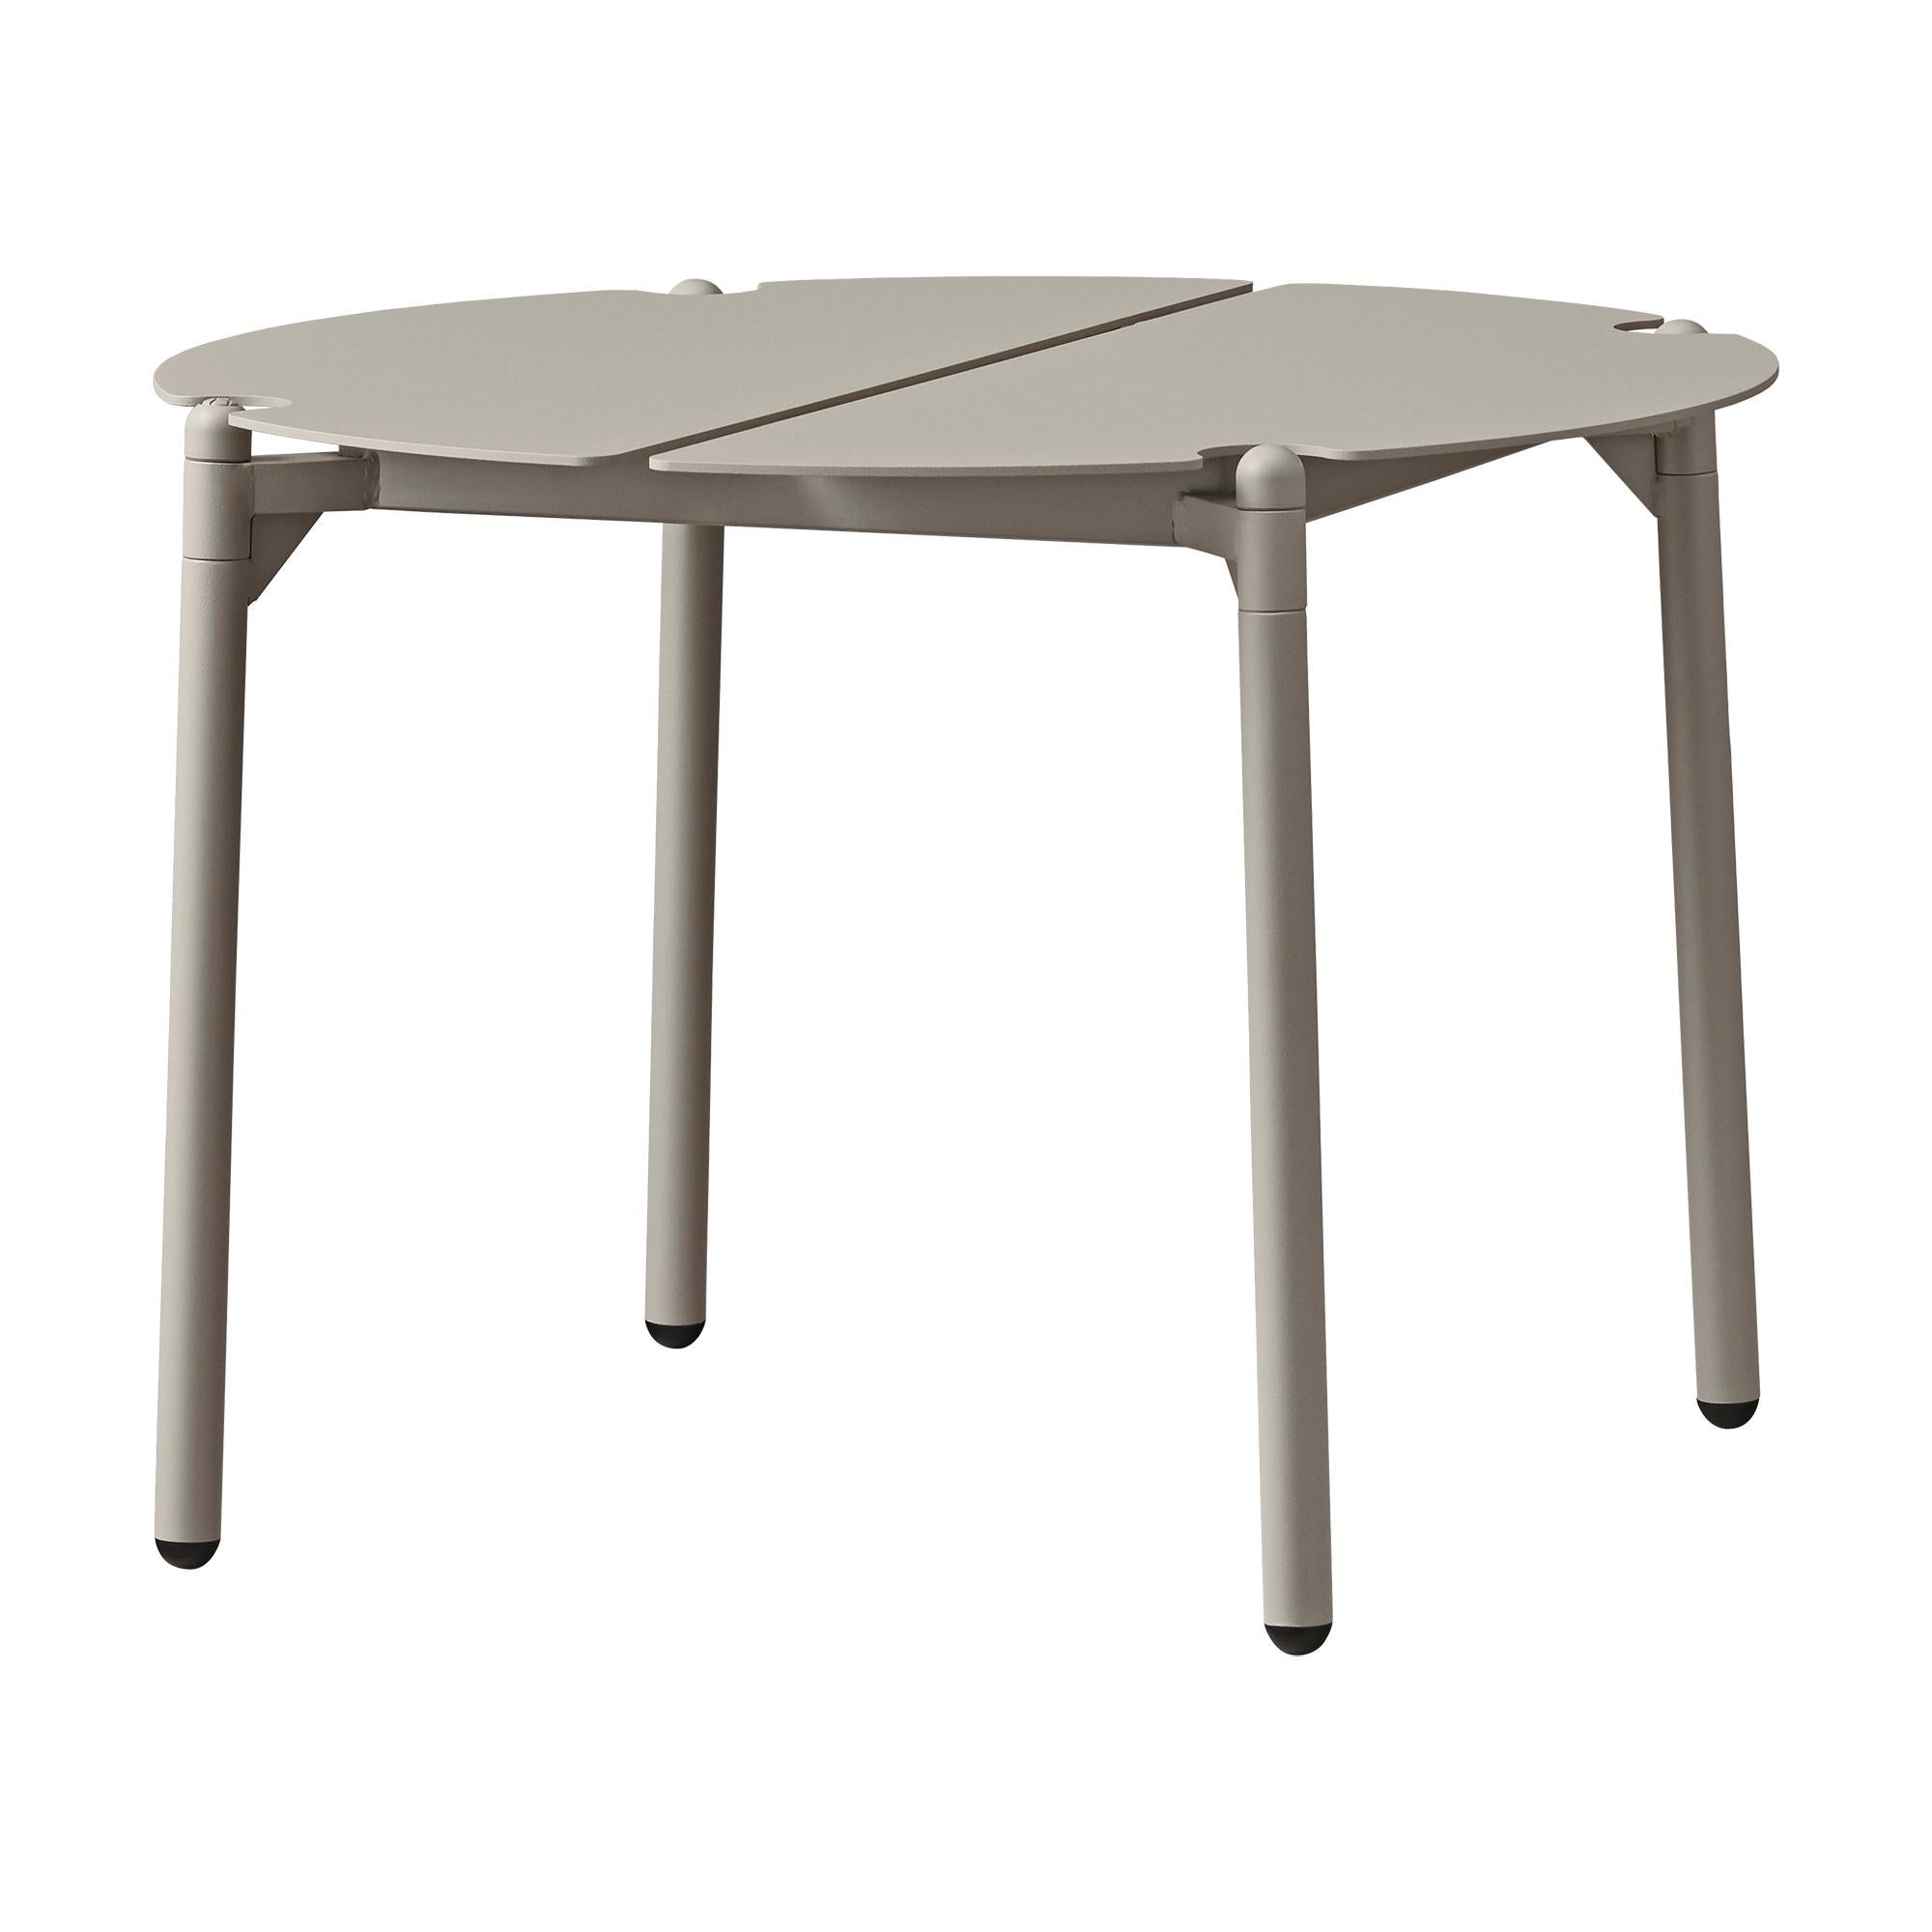 Small Taupe Minimalist lounge table
Dimensions: Diameter 50 x Height 35 cm 
Materials: Steel w. matte powder coating & aluminum w. matte powder coating.
Available in colors: Taupe, bordeaux, forest, ginger bread, black and, black and gold.